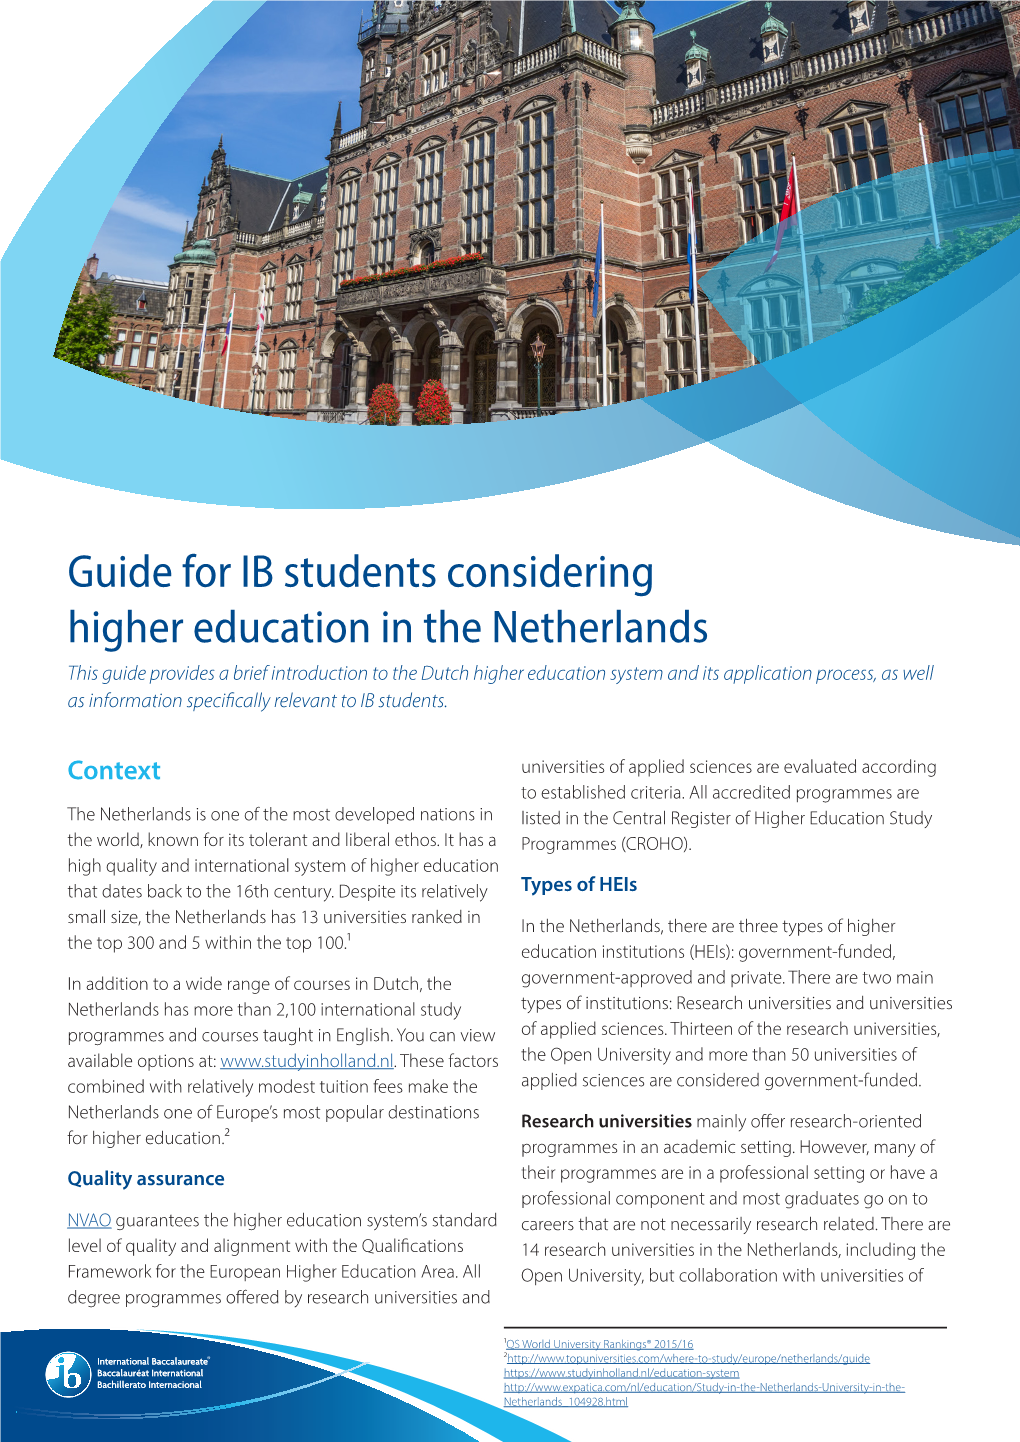 Guide for IB Students Considering Higher Education in the Netherlands